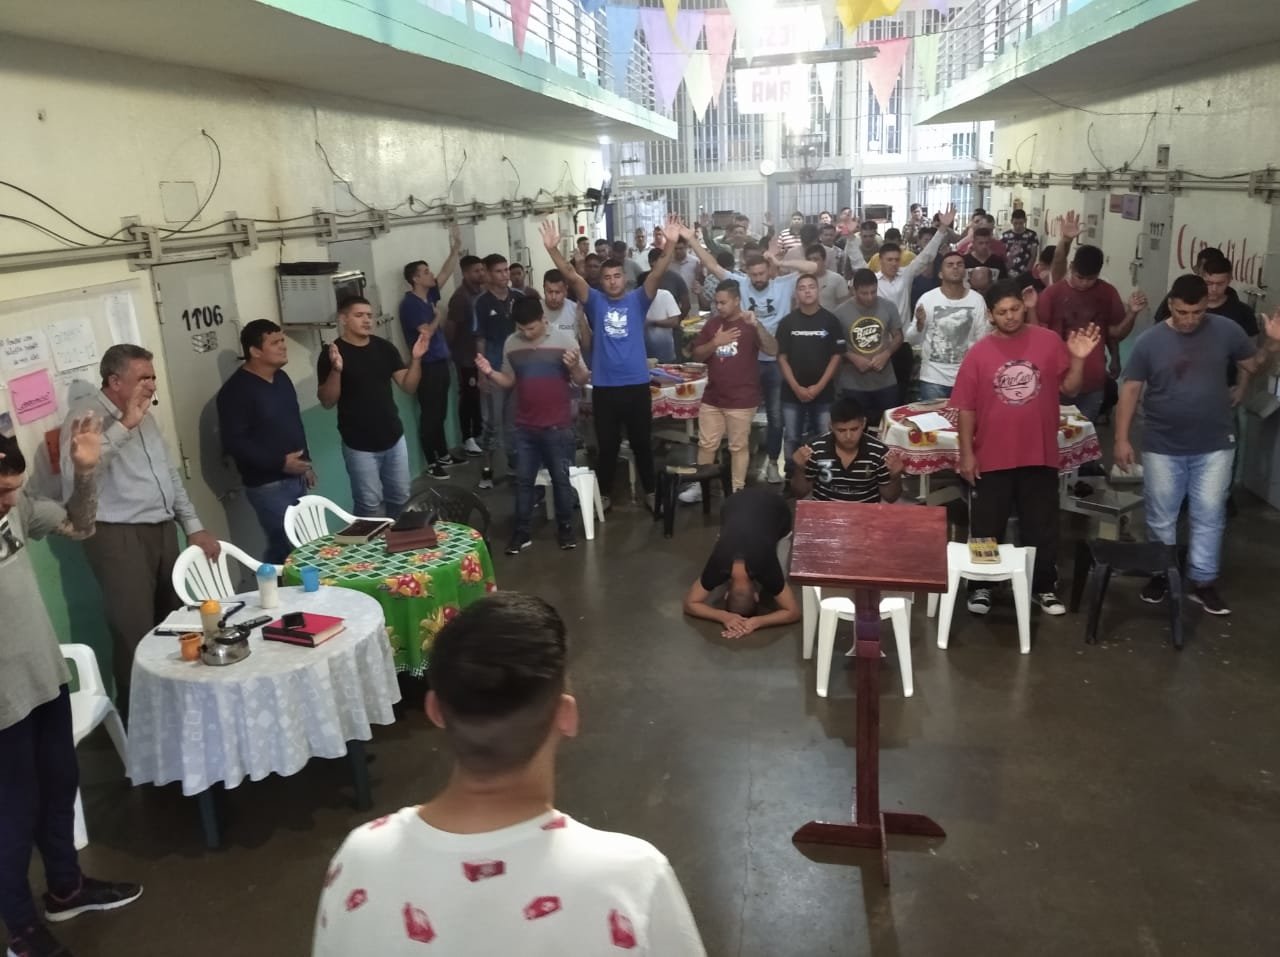 Inmates worship inside a prison in Argentina, where revival is underway.